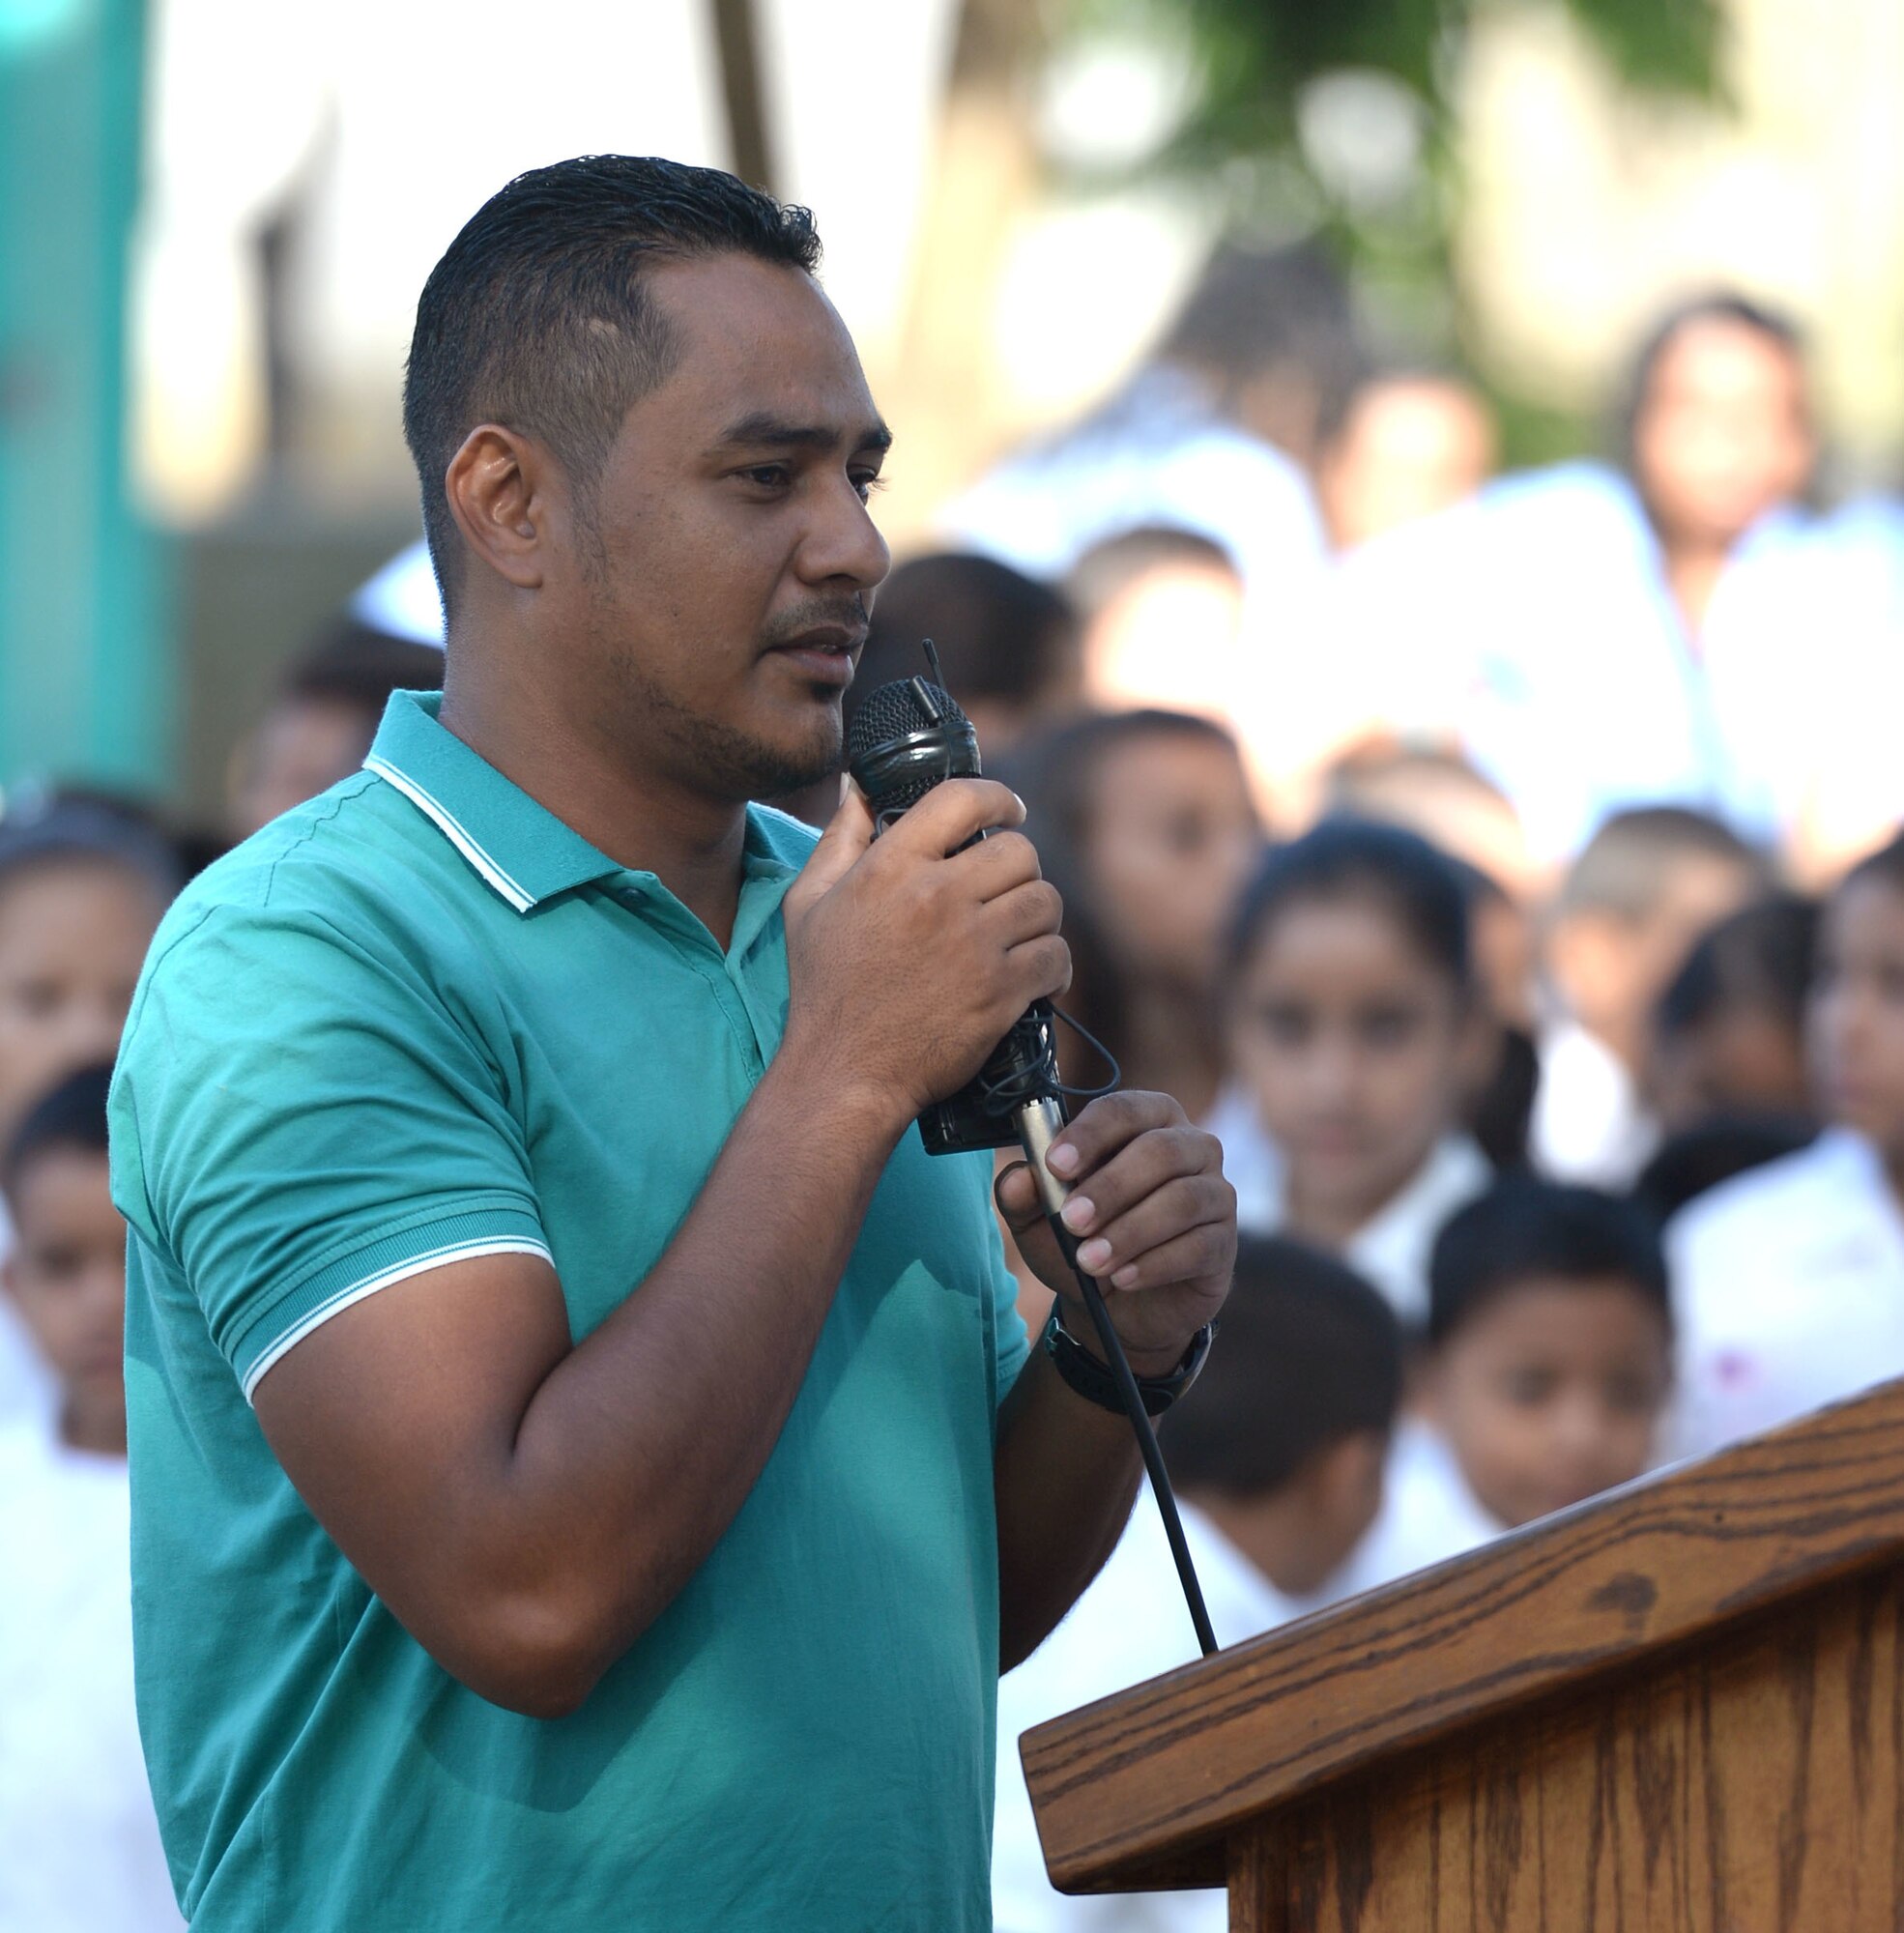 Abraham Ruiz, Gabriela Mistral principal, speaks during the groundbreaking ceremony at his school in Ocotoes Alto, Honduras, June 1, 2015. The event marked the first day of construction on the site and the first day of the New Horizons Honduras 2015 training exercise taking place in and around Trujillo and Tocoa Honduras. New Horizons was launched in the 1980s and is an annual joint humanitarian assistance exercise that U.S. Southern Command conducts with a partner nation in Central America, South America or the Caribbean. The exercise improves joint training readiness of U.S. and partner nation civil engineers, medical professionals and support personnel through humanitarian assistance activities. (U.S. Air Force photo by Capt. David J. Murphy/Released)